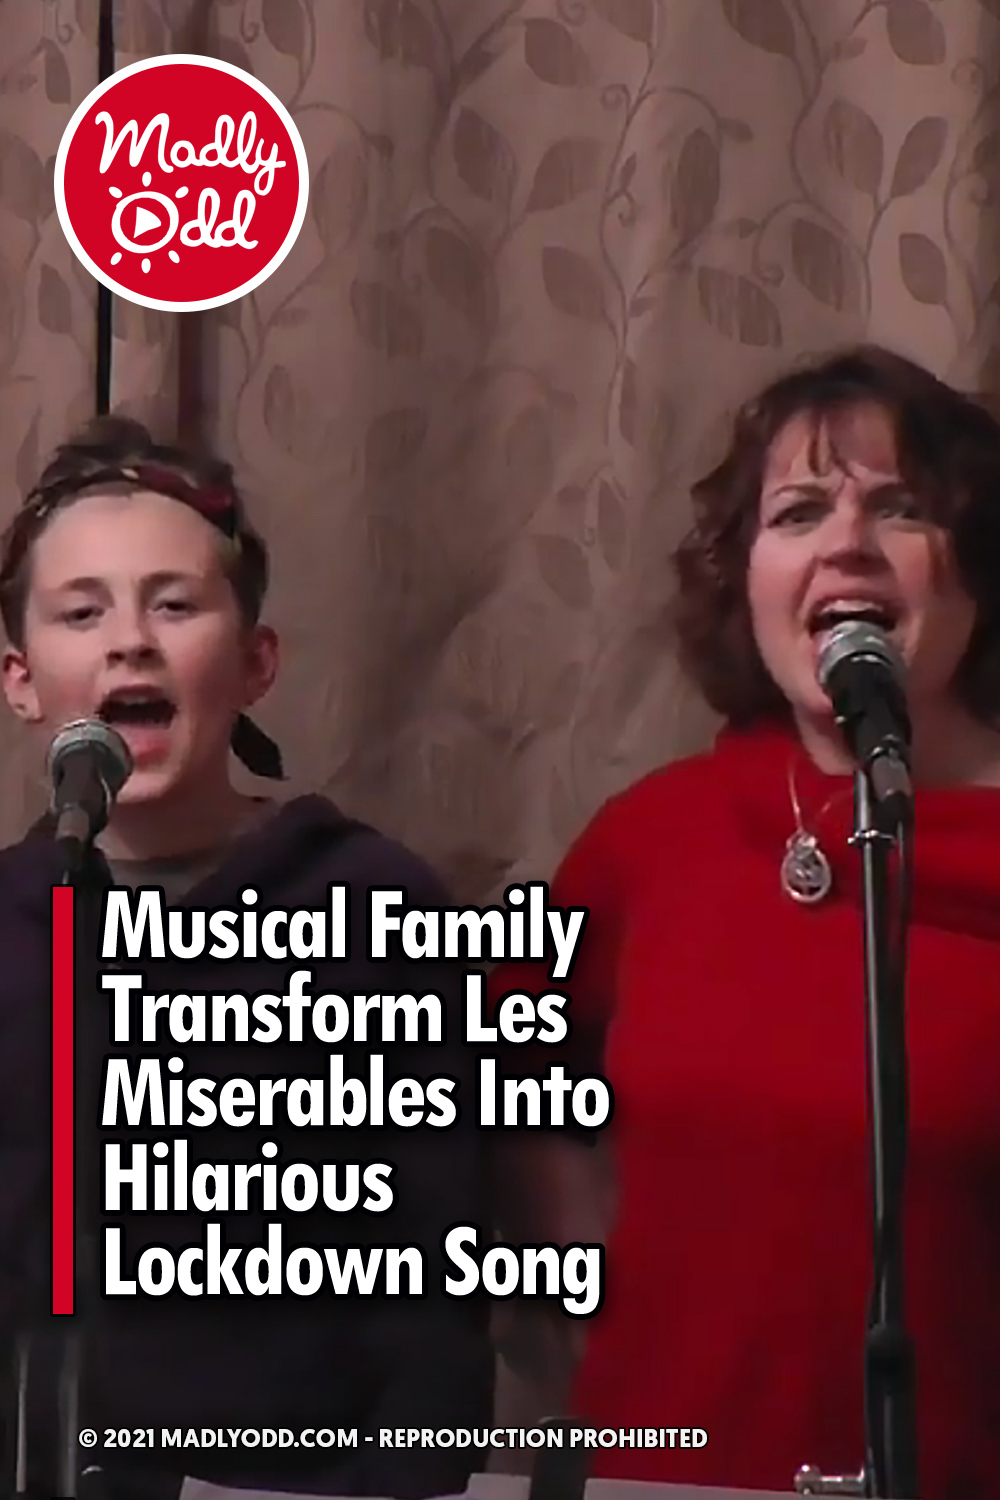 Musical Family Transform Les Miserables Into Hilarious Lockdown Song